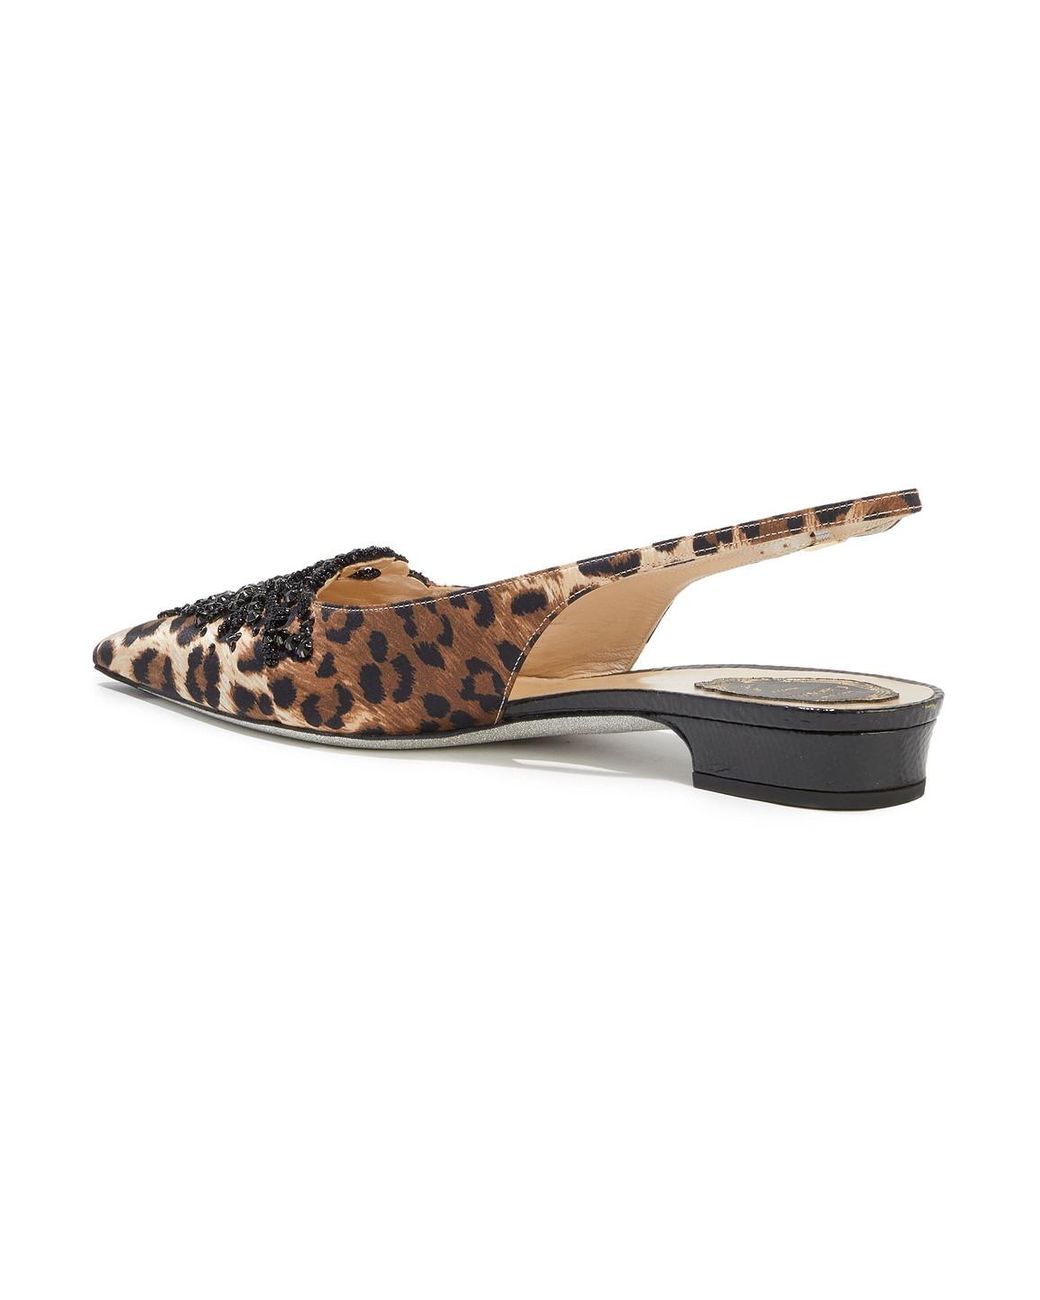 Rene Caovilla Operina Embellished Leopard-print Satin Slingback Point-toe Flats in Animal Print Womens Shoes Flats and flat shoes Ballet flats and ballerina shoes Brown 